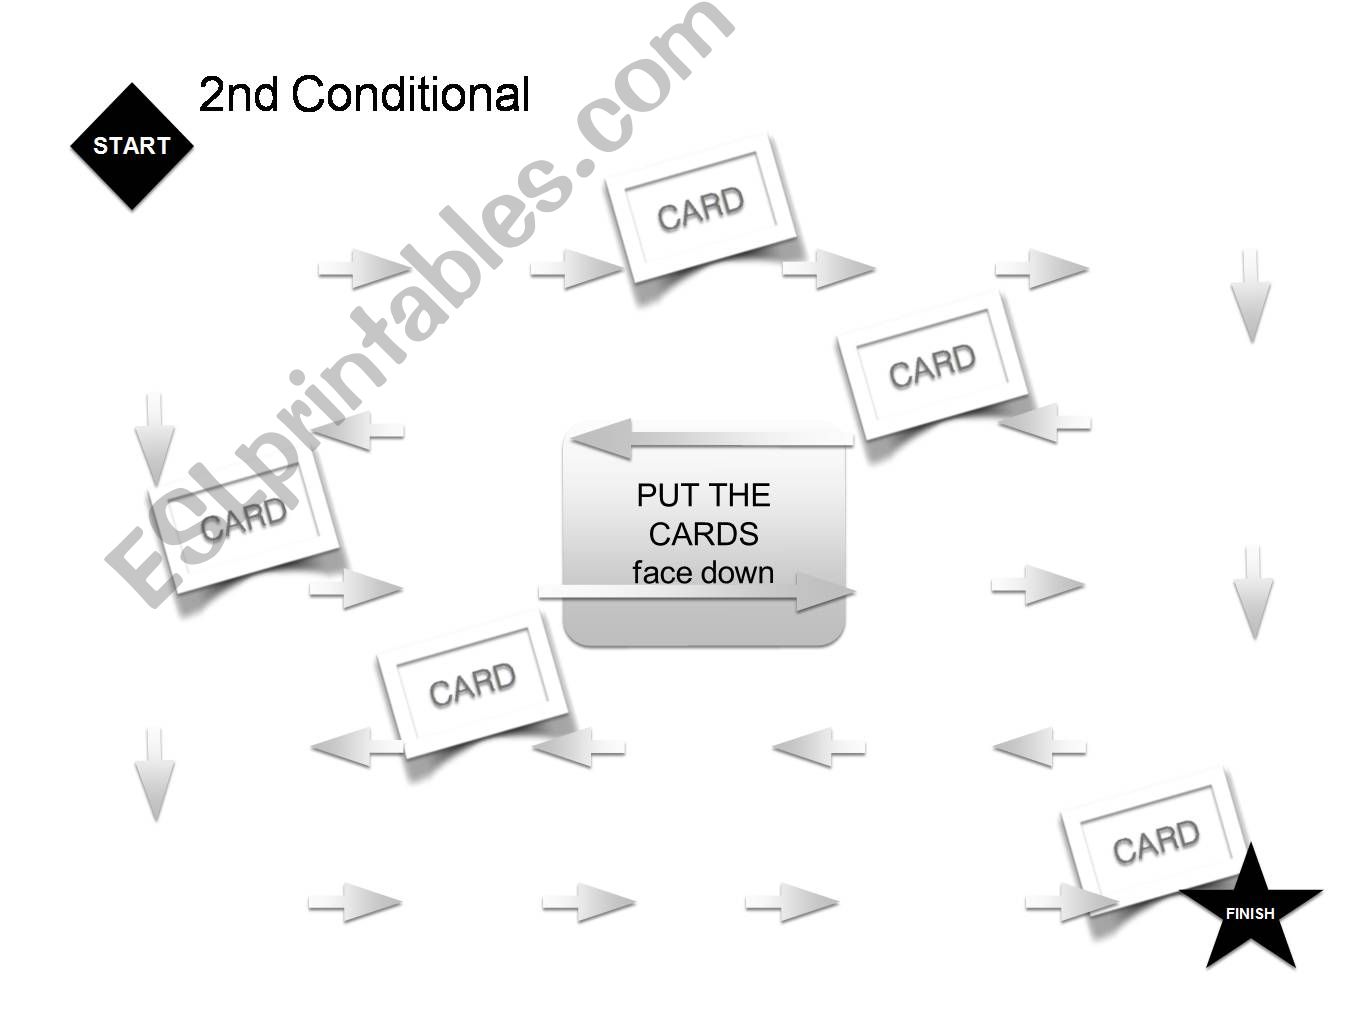 SECOND CONDITIONAL BOARD GAME powerpoint